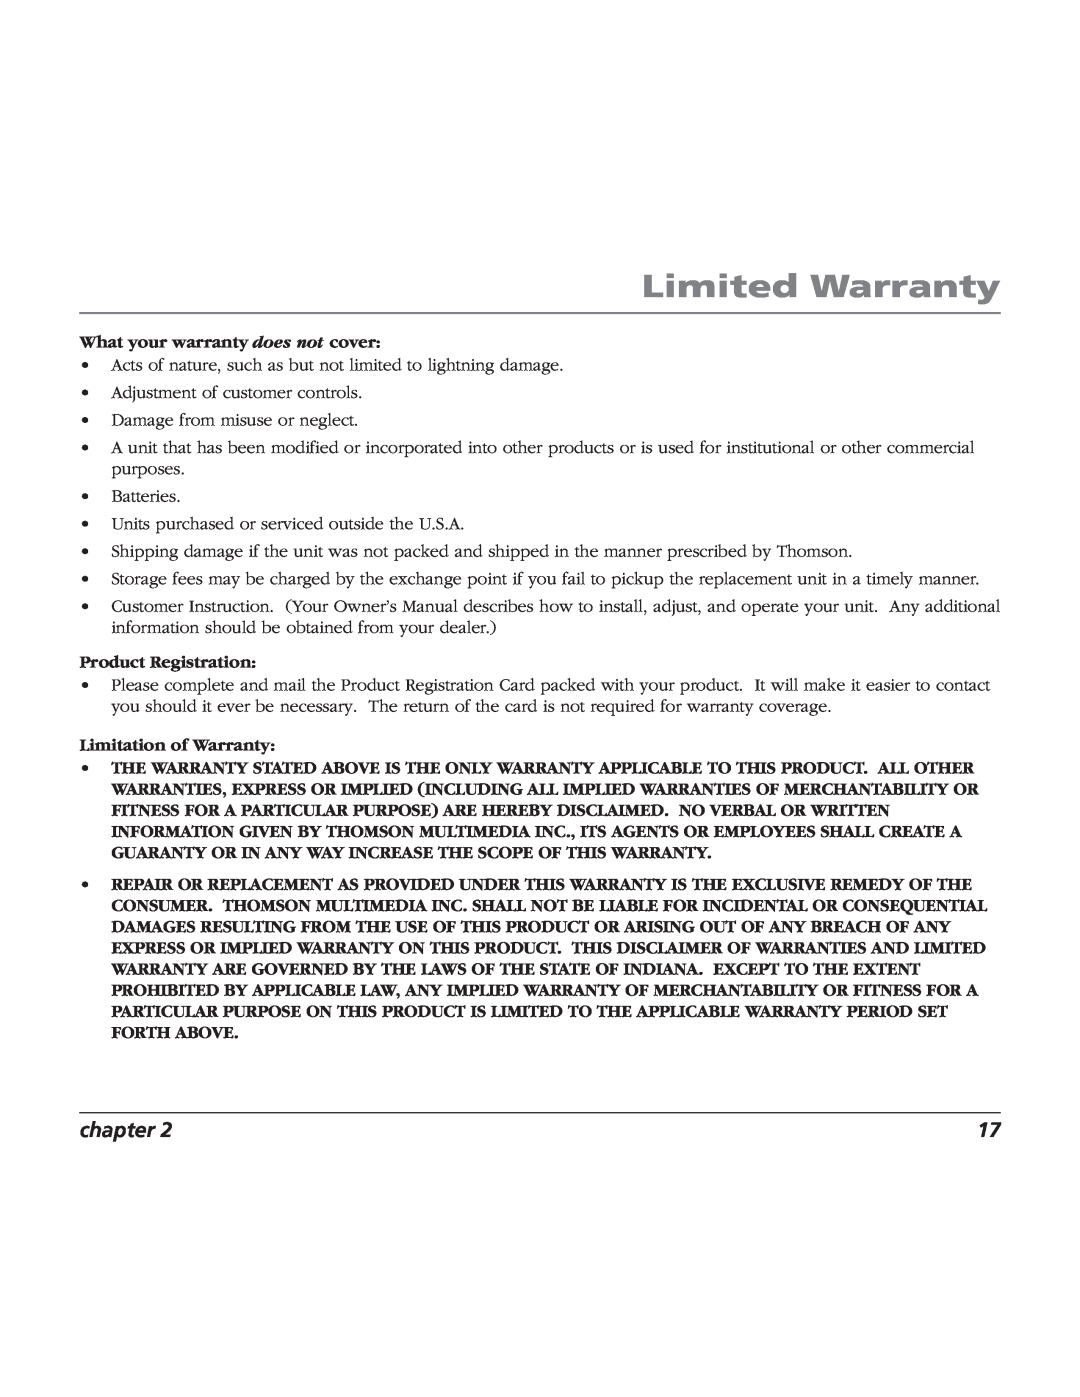 RCA BLC524 user manual Limited Warranty, chapter 